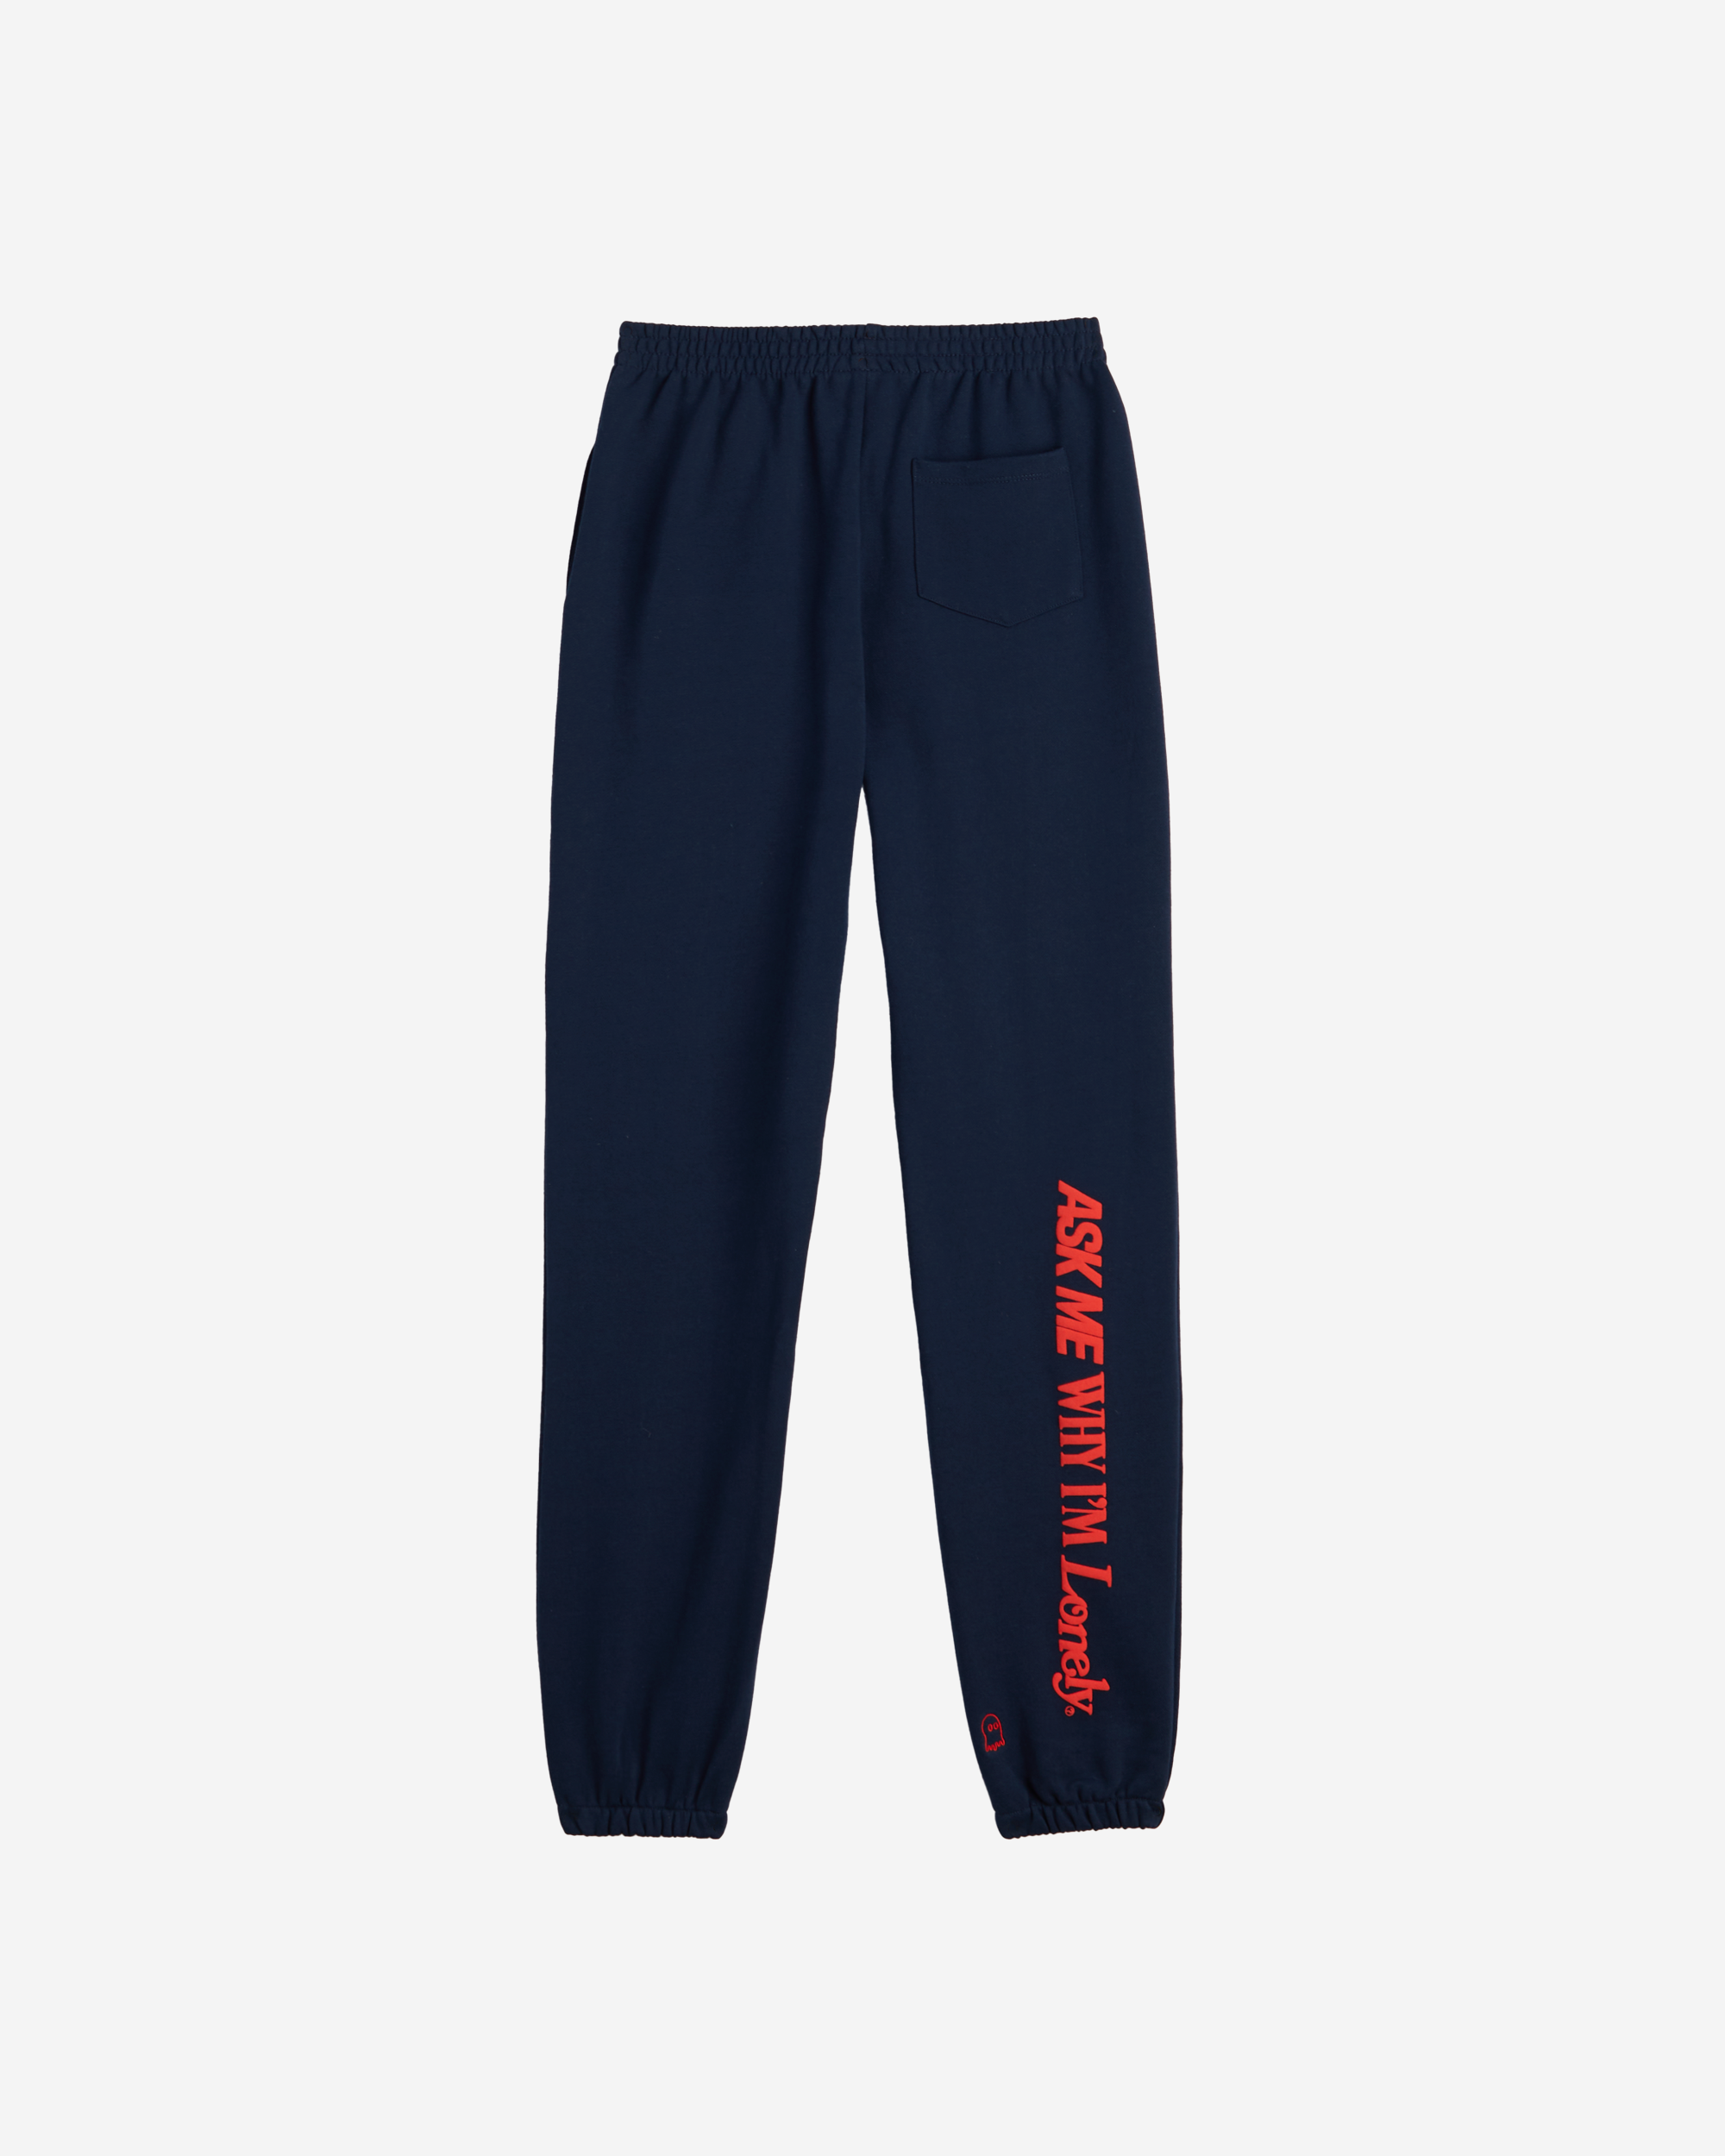 Ask Me Why I'm Lonely Heavyweight Sweatpants